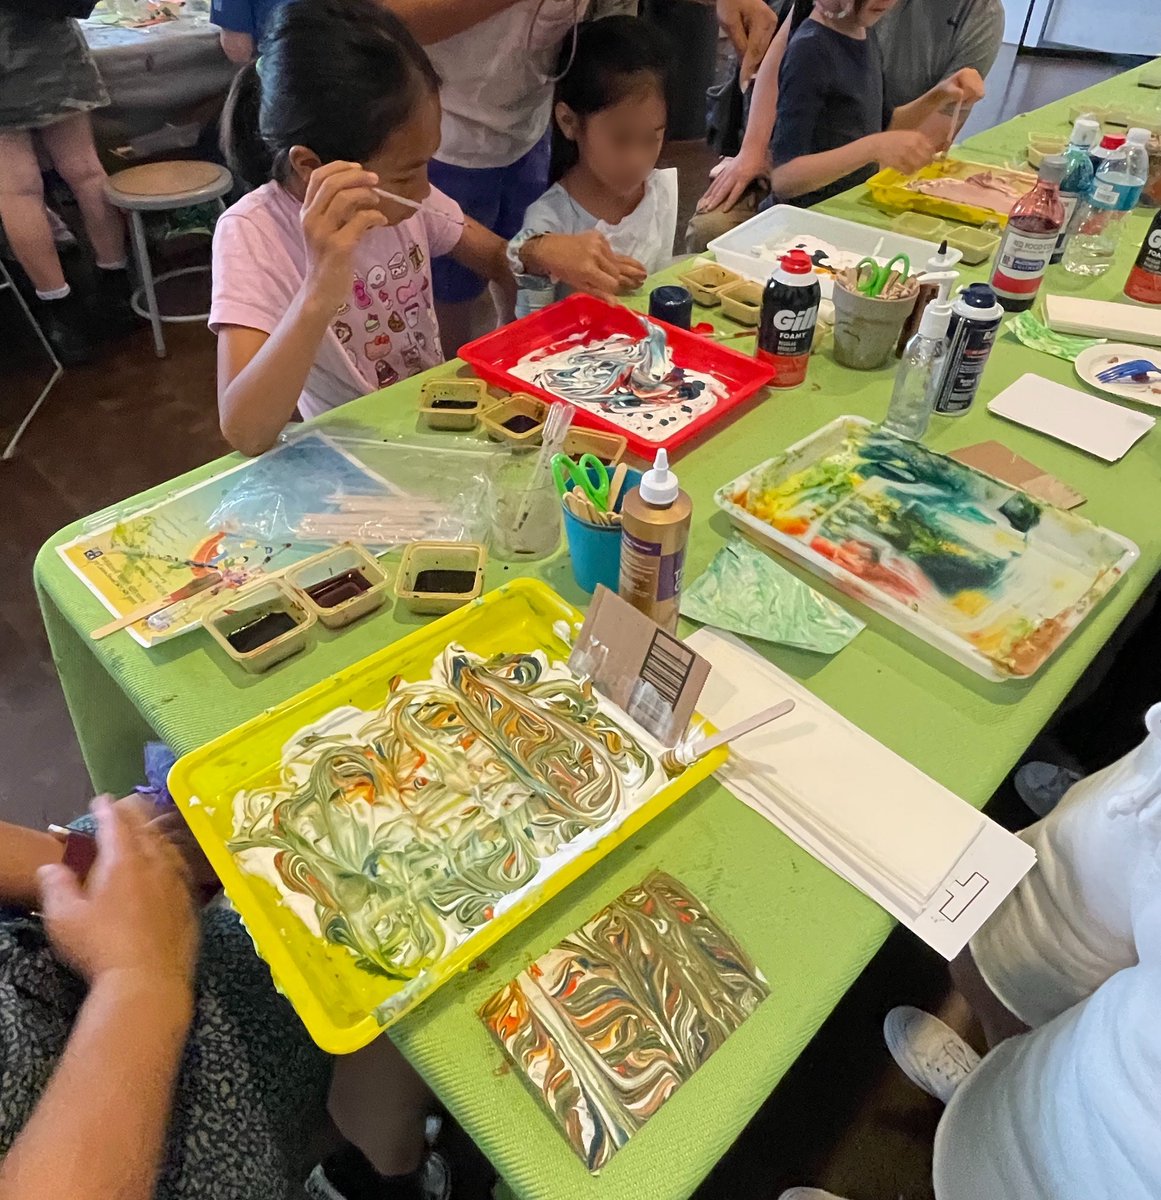 🖌 Join us for our Splash and Swirl Paddle Design guided by Teaching Artist Yu Rong! 🌊🚣‍♀️ 📆 Saturday, August 19 ⏰ 2pm - 4pm 📍 The Museum of Chinese in America 🆓 Free Admission RSVP is optional but greatly appreciated 🥹 You can RSVP on our website, mocanyc.org.